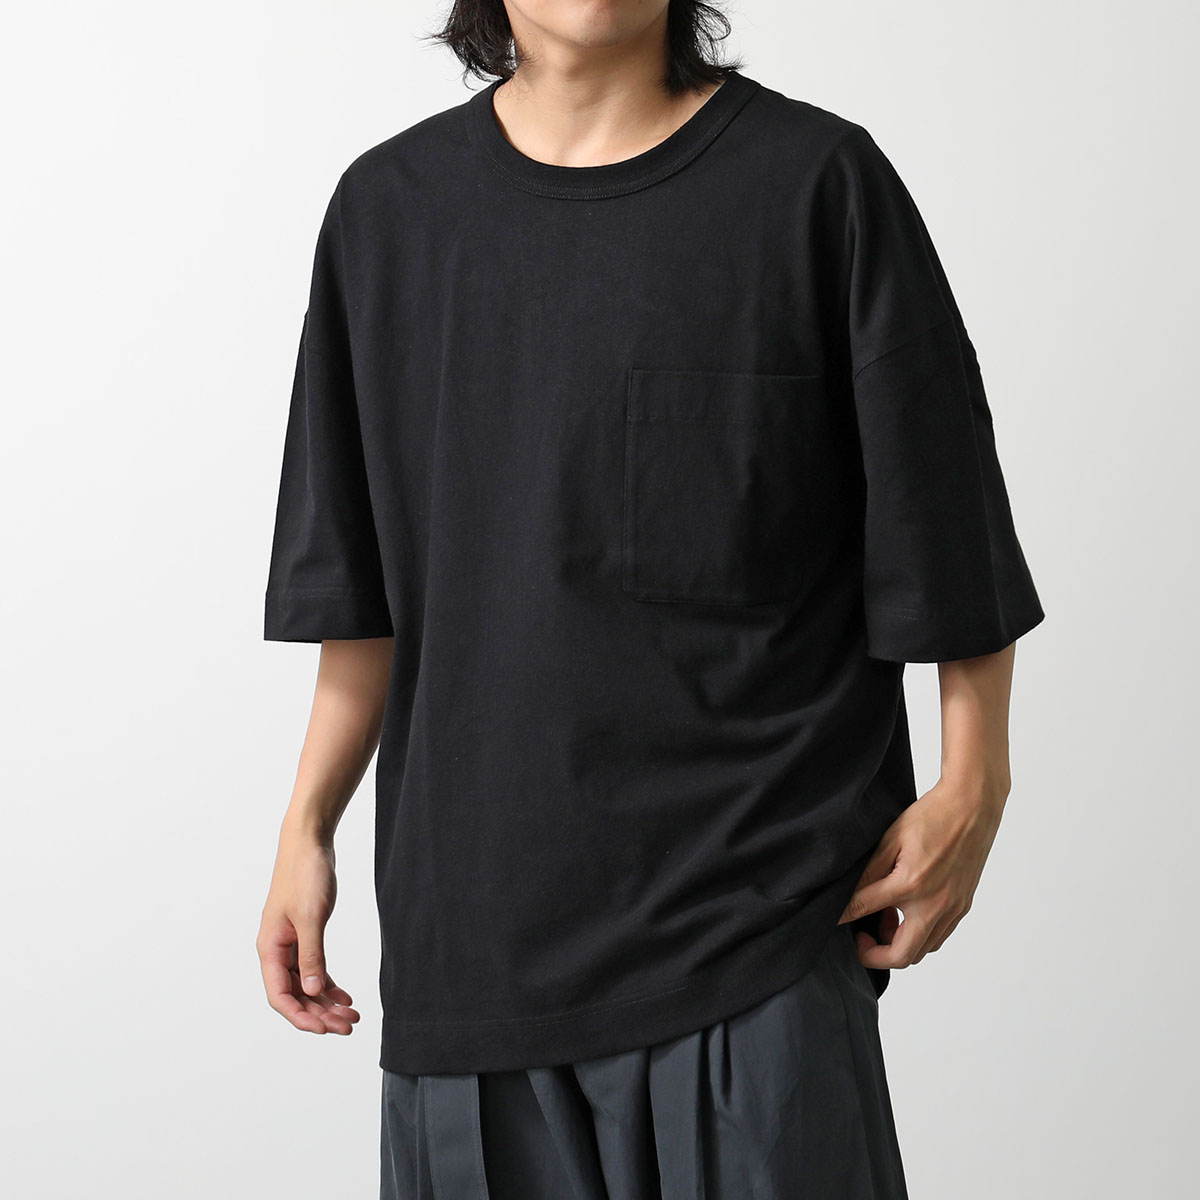 Lemaire ルメール Tシャツ TO1165 LJ1010 メンズ 半袖 クルーネック カットソ...